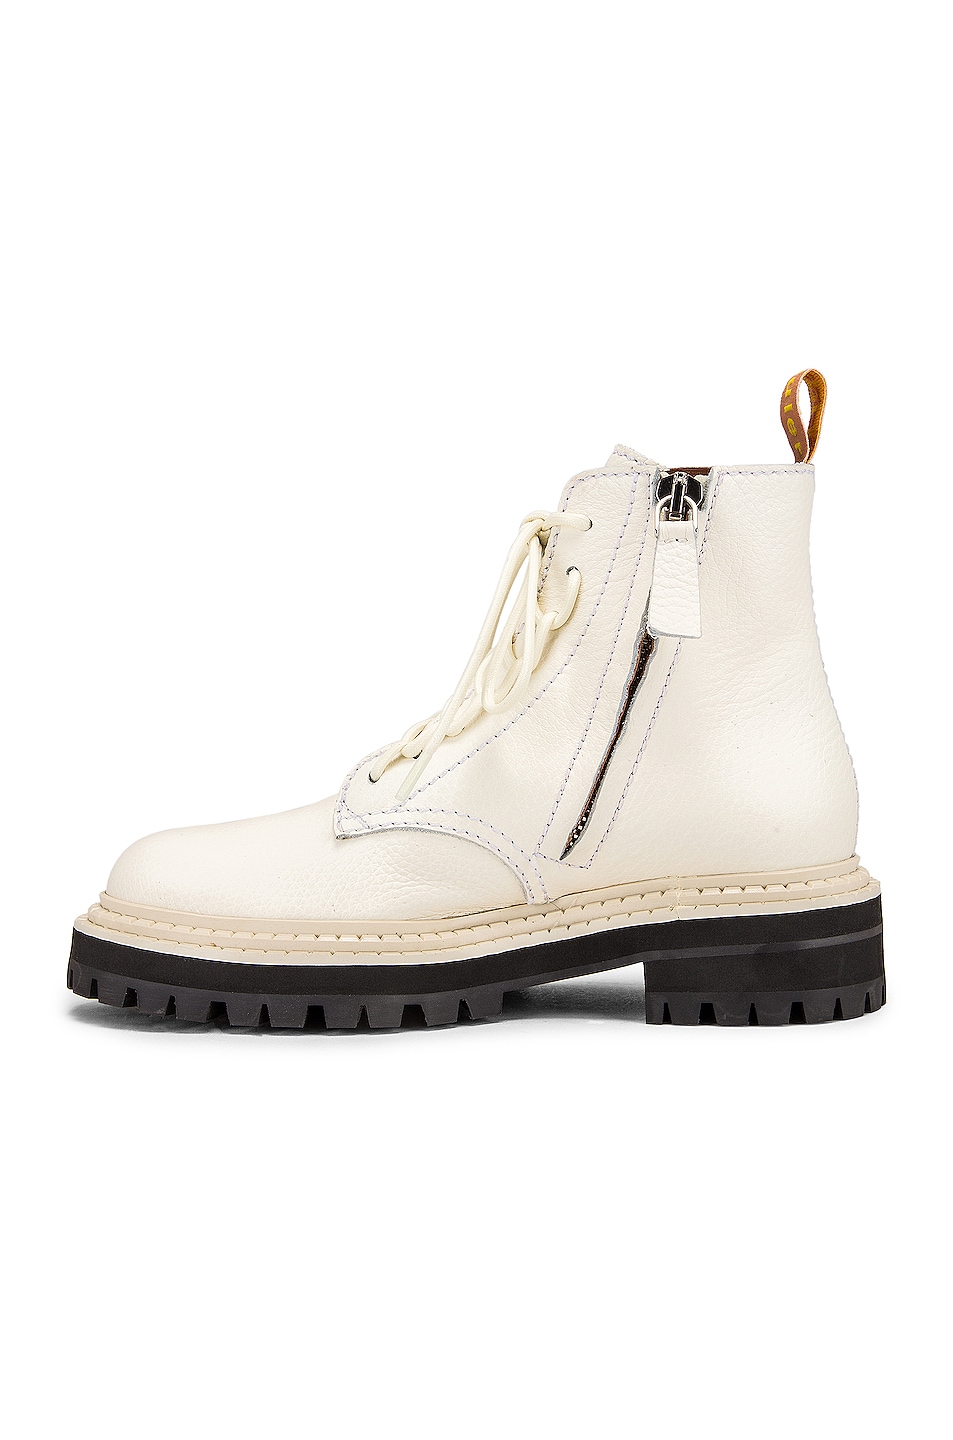 Proenza Schouler Chunky Boots in White | FWRD